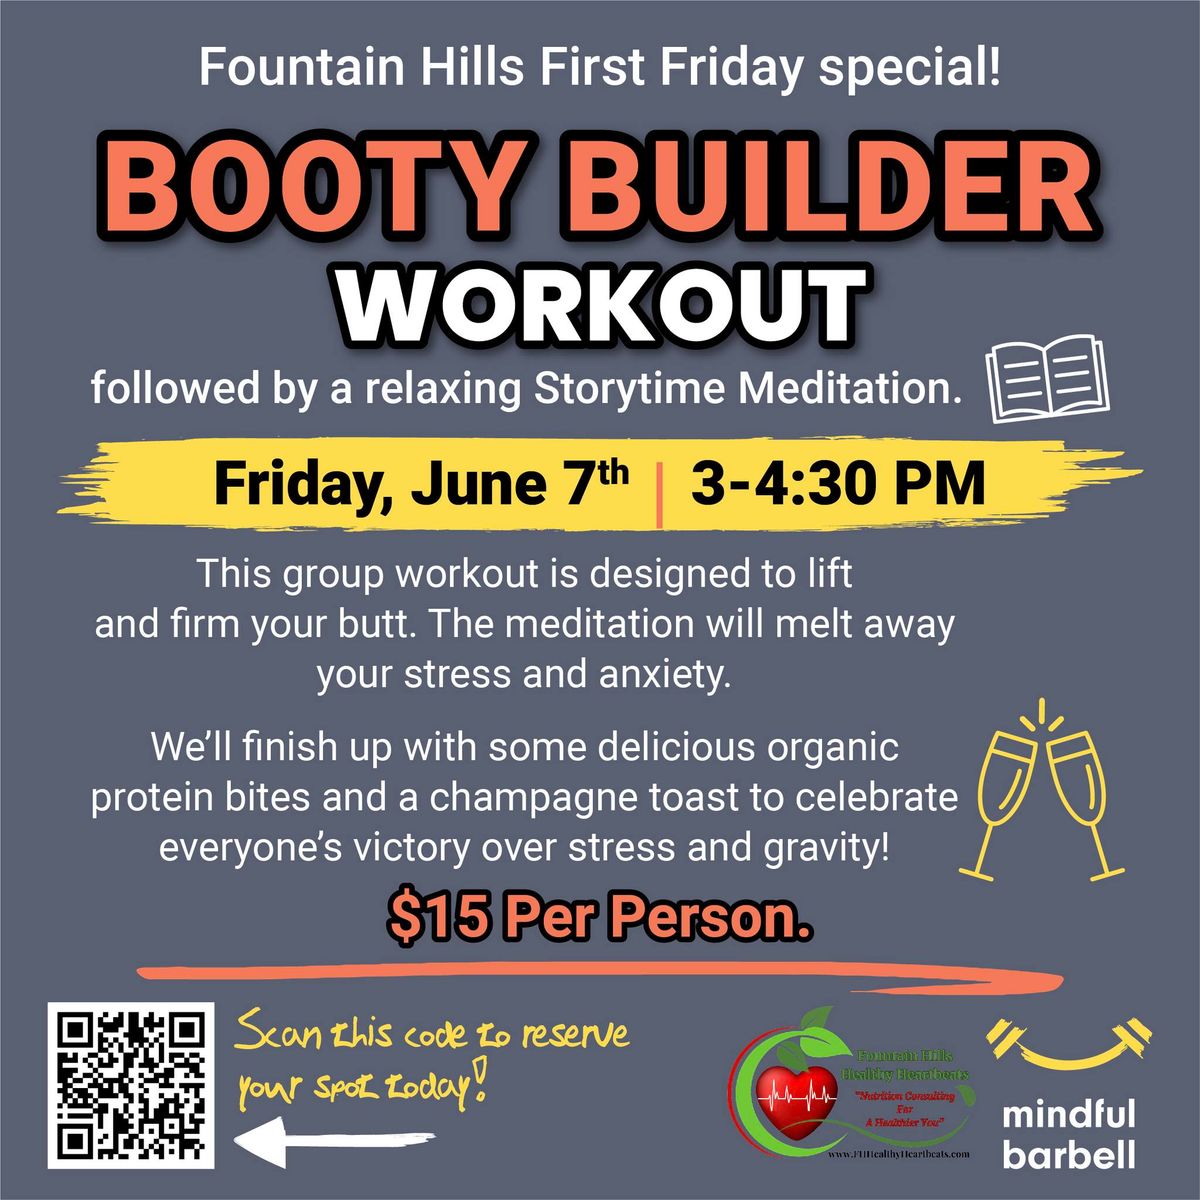 Fountain Hills First Friday Special!  Booty Builder Workout with Storytime Meditation